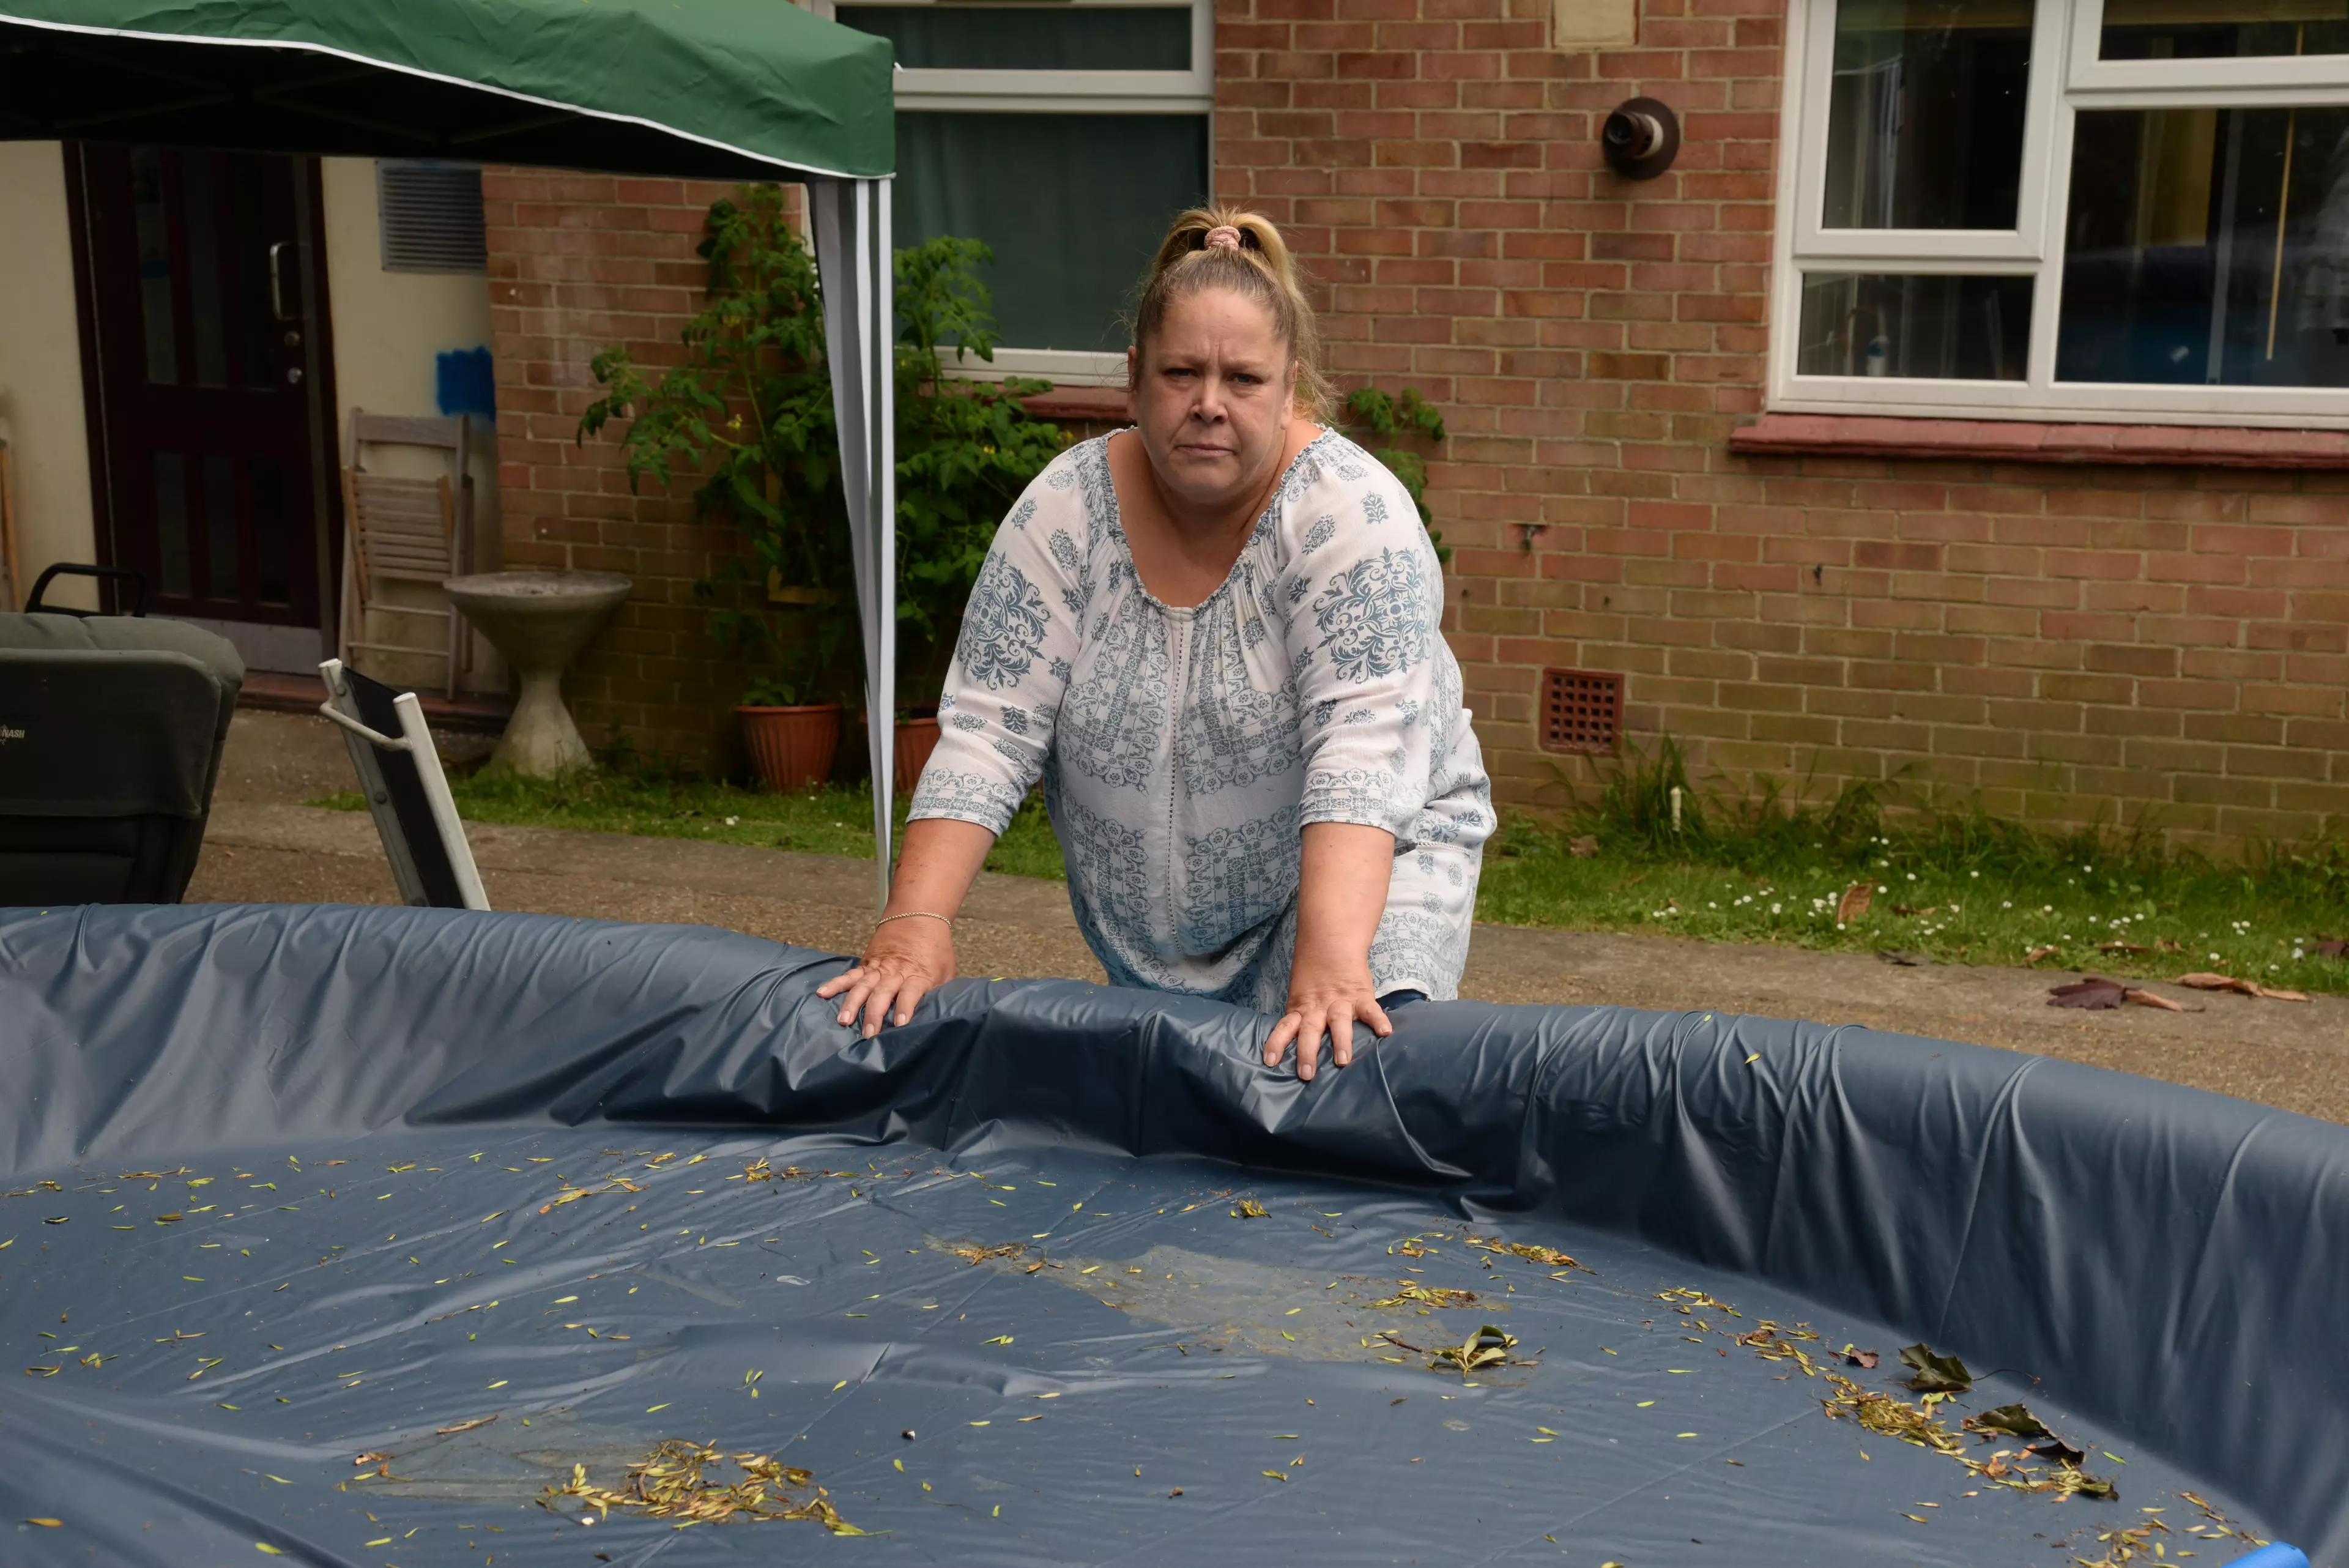 Residents Told To Drain Their Paddling Pool - In Case A Burglar Drowns In It